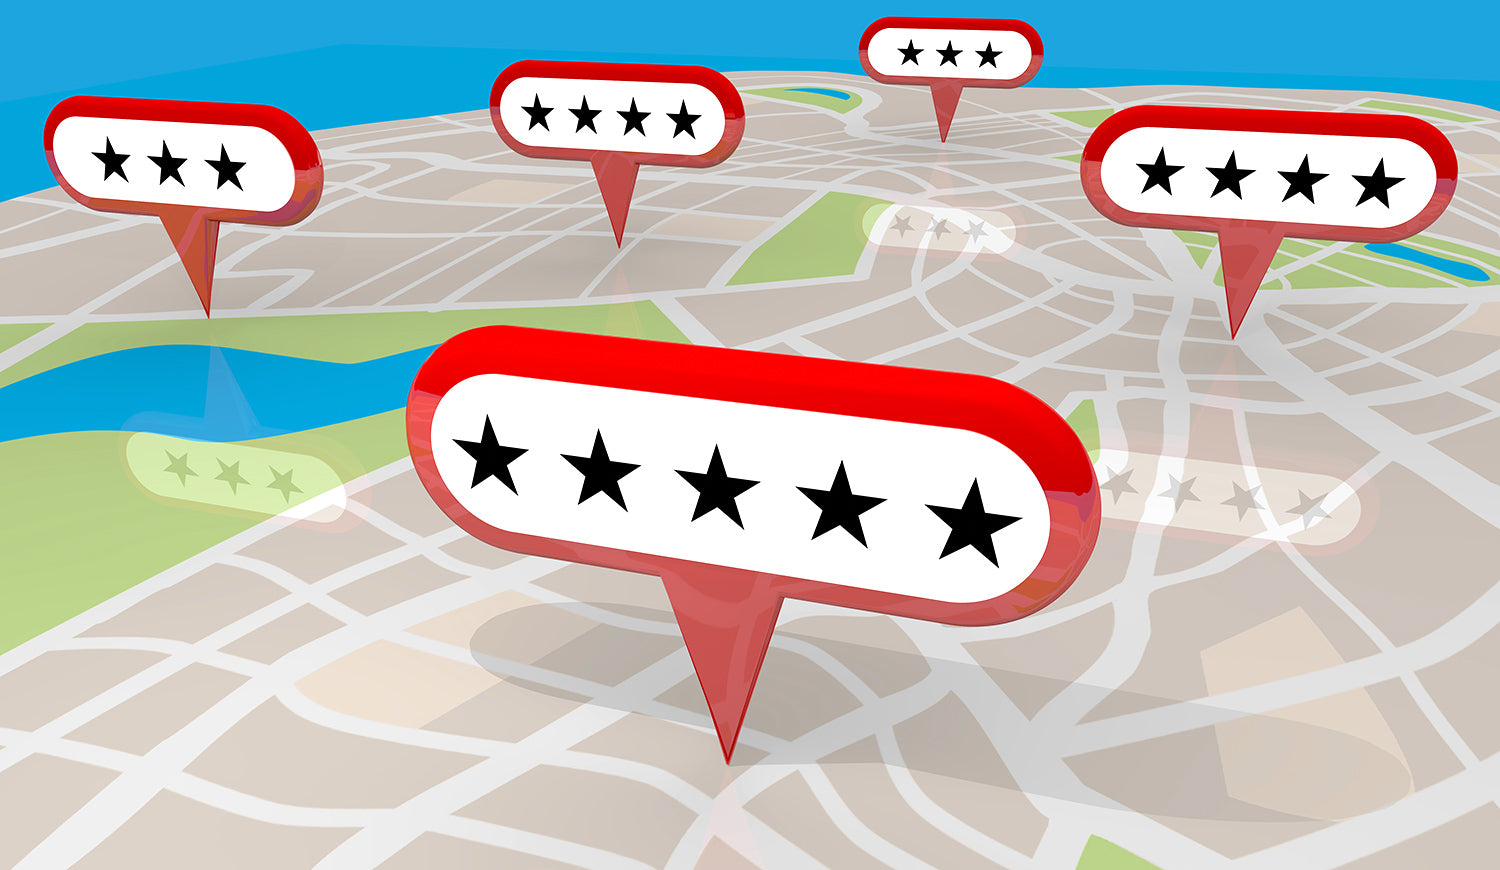 Google Reviews: Google Maps showcases the businesses with the highest rating near you.